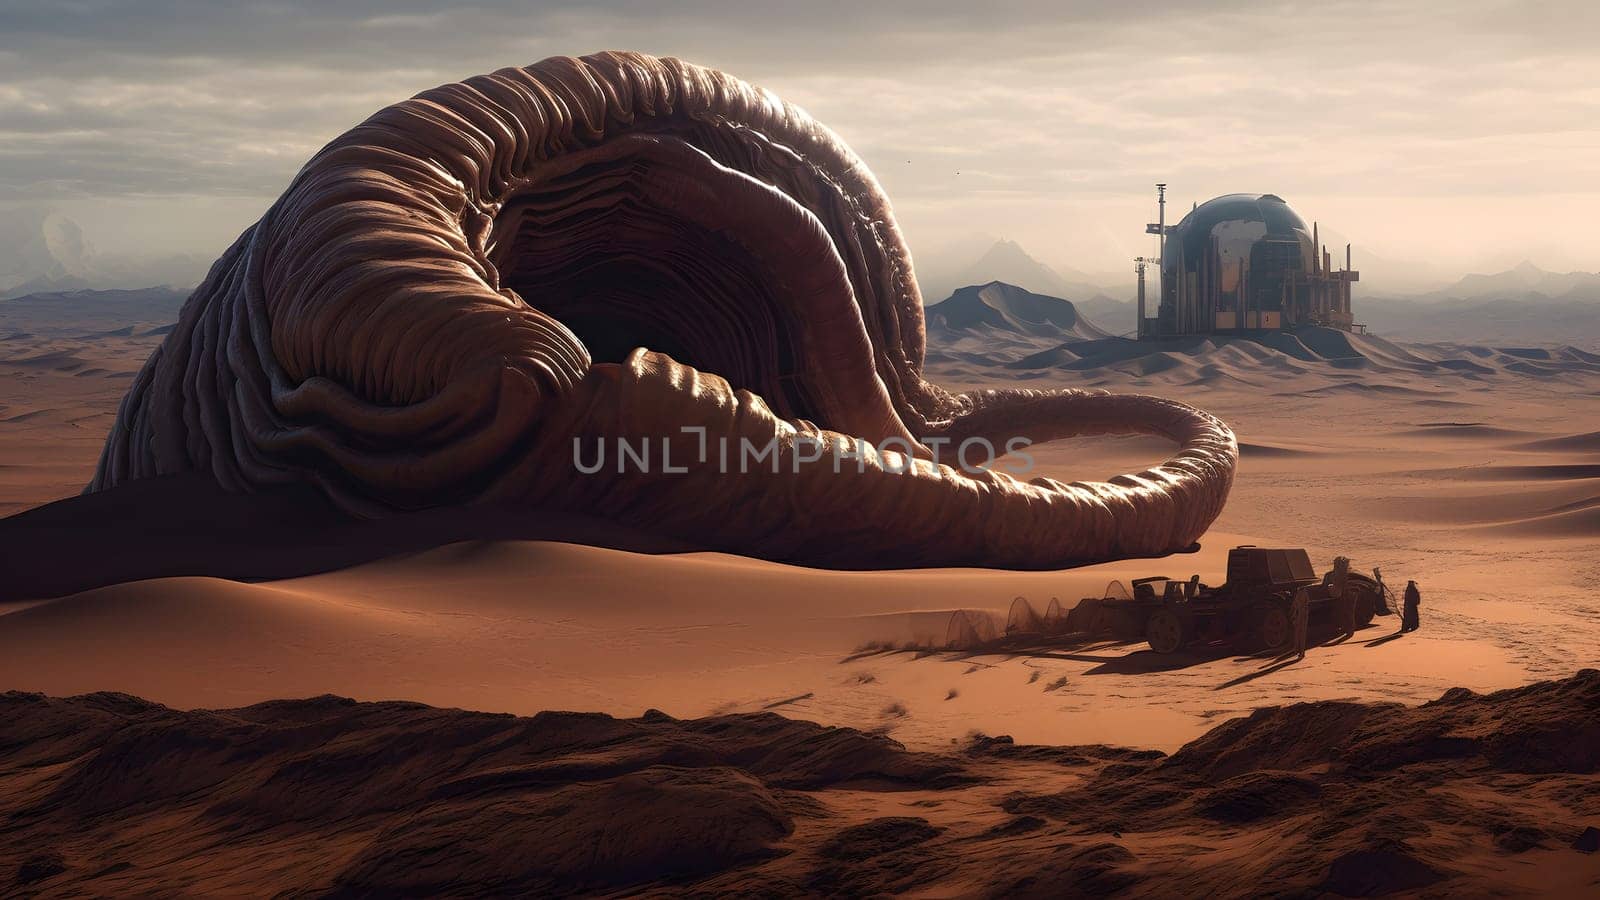 giant worm creature on martian desert surface, neural network generated image by z1b